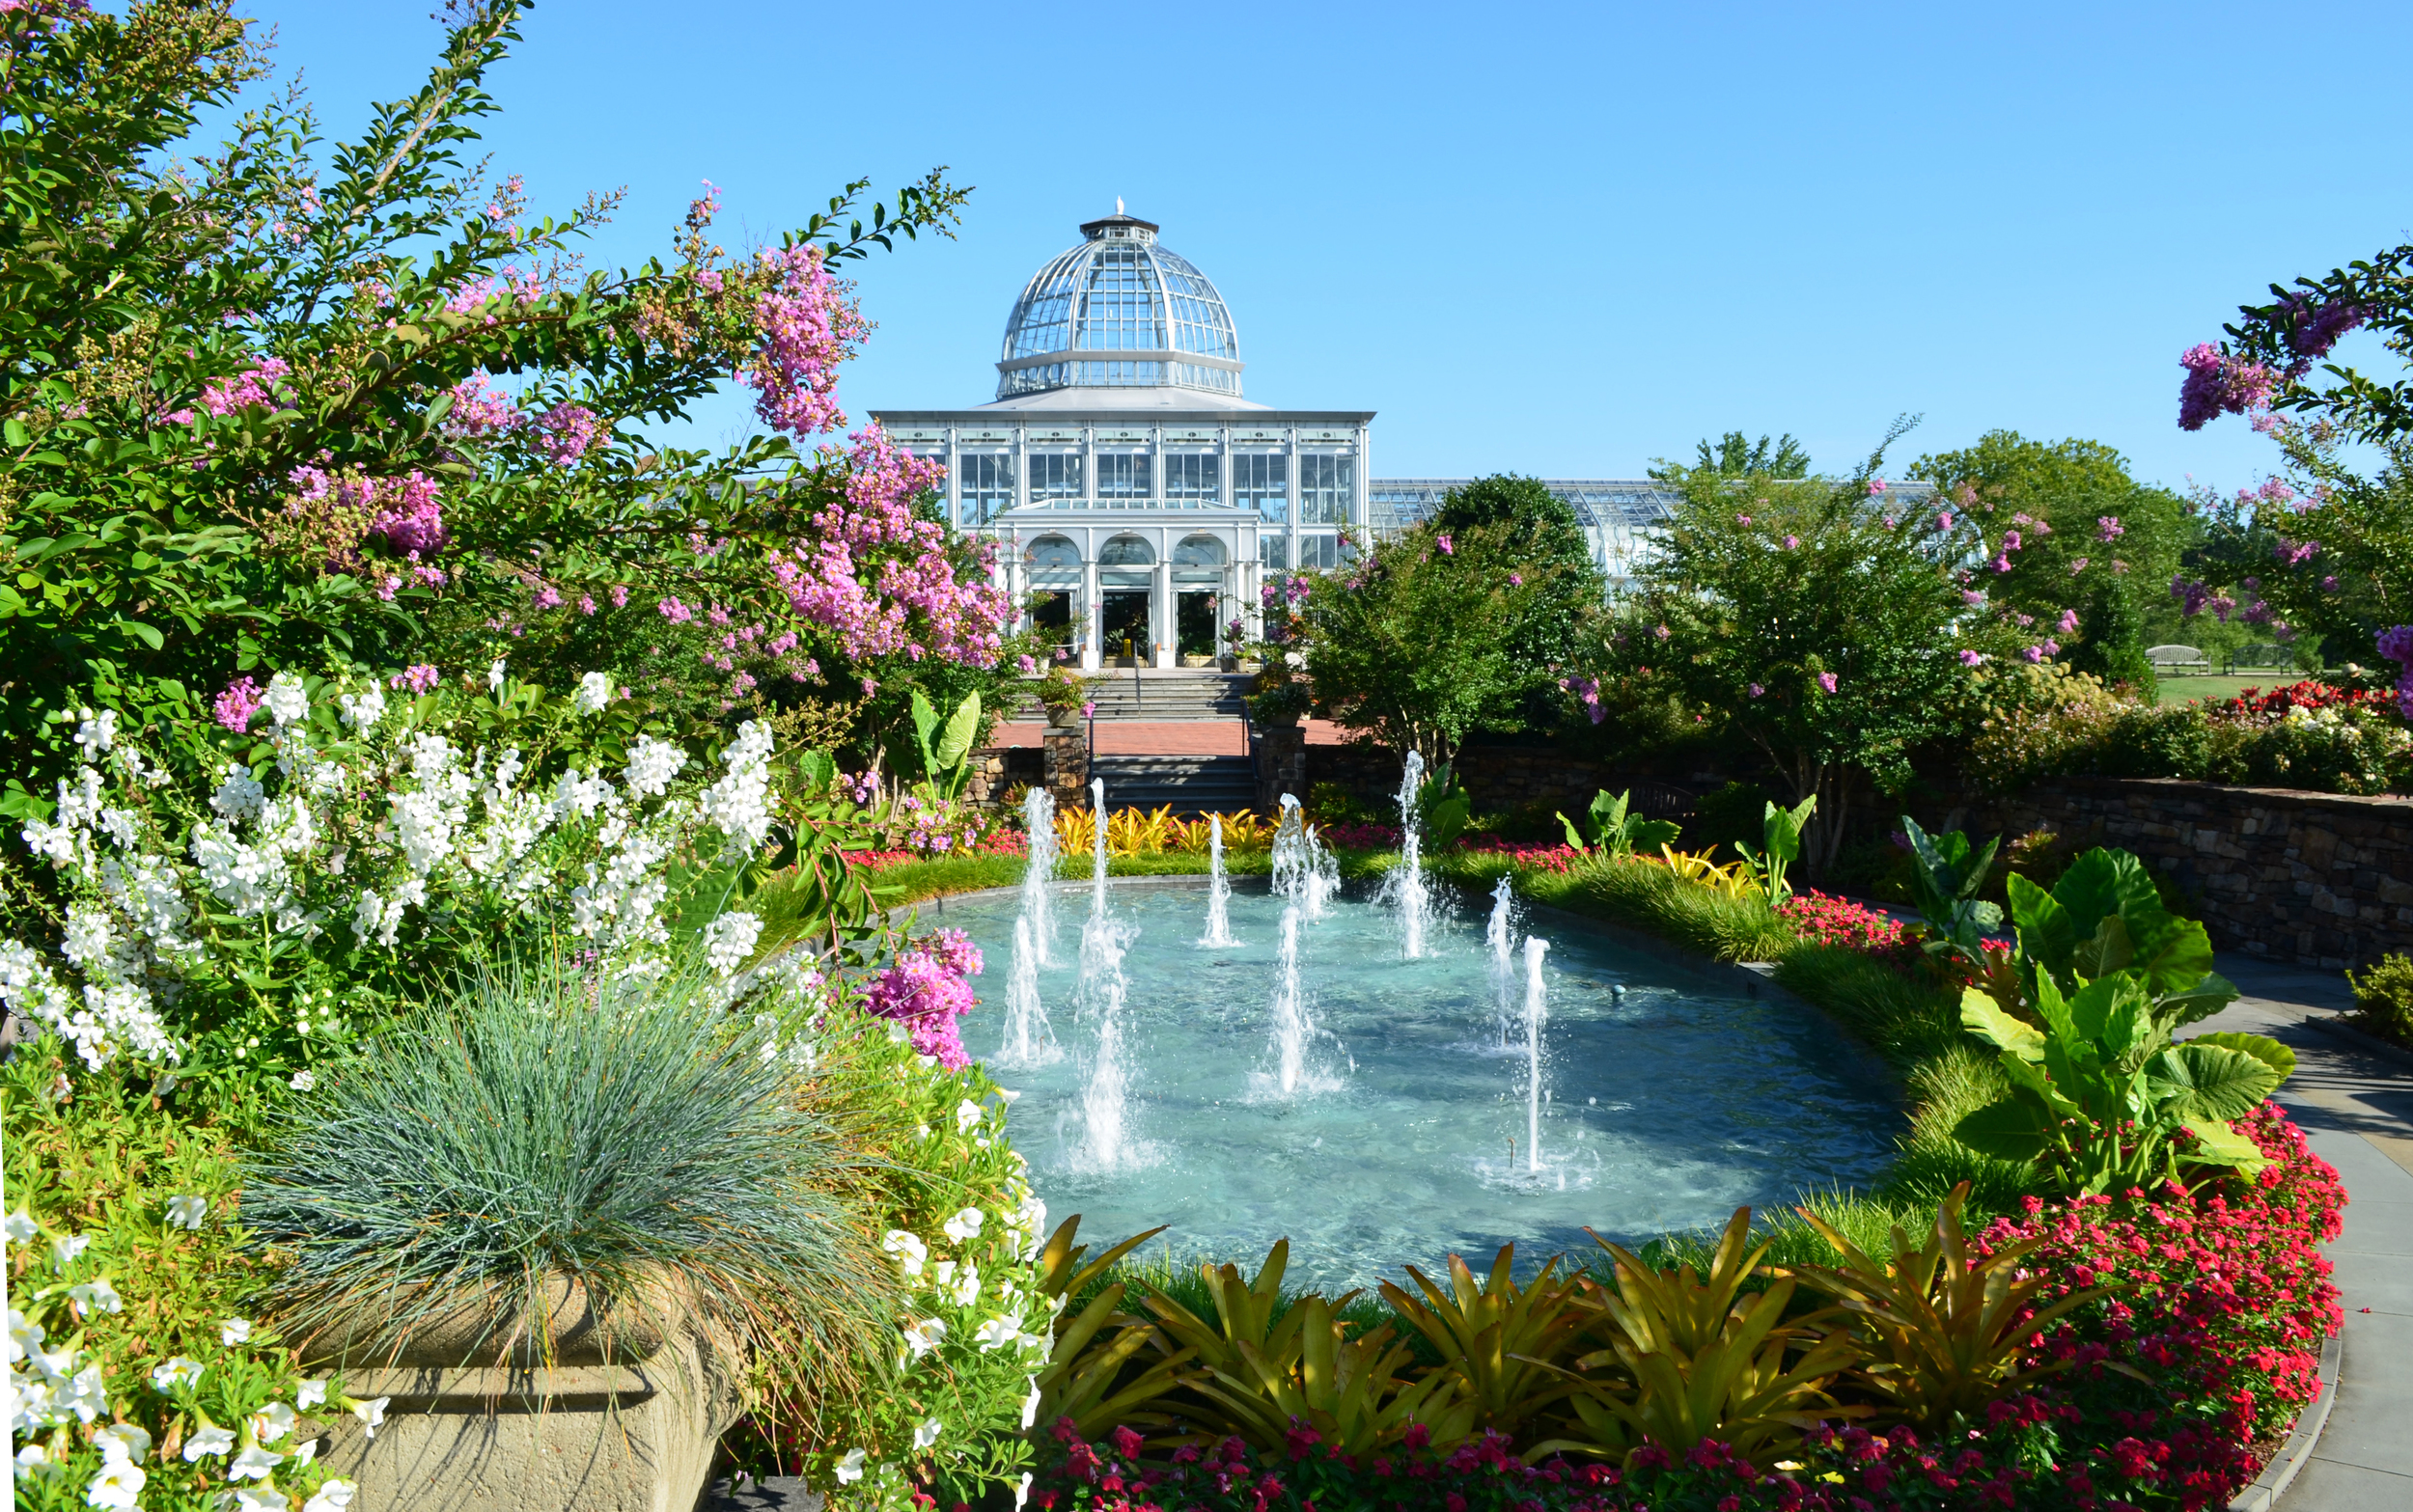 Conservatory Fountain Garden taken from left side container foreground.jpg